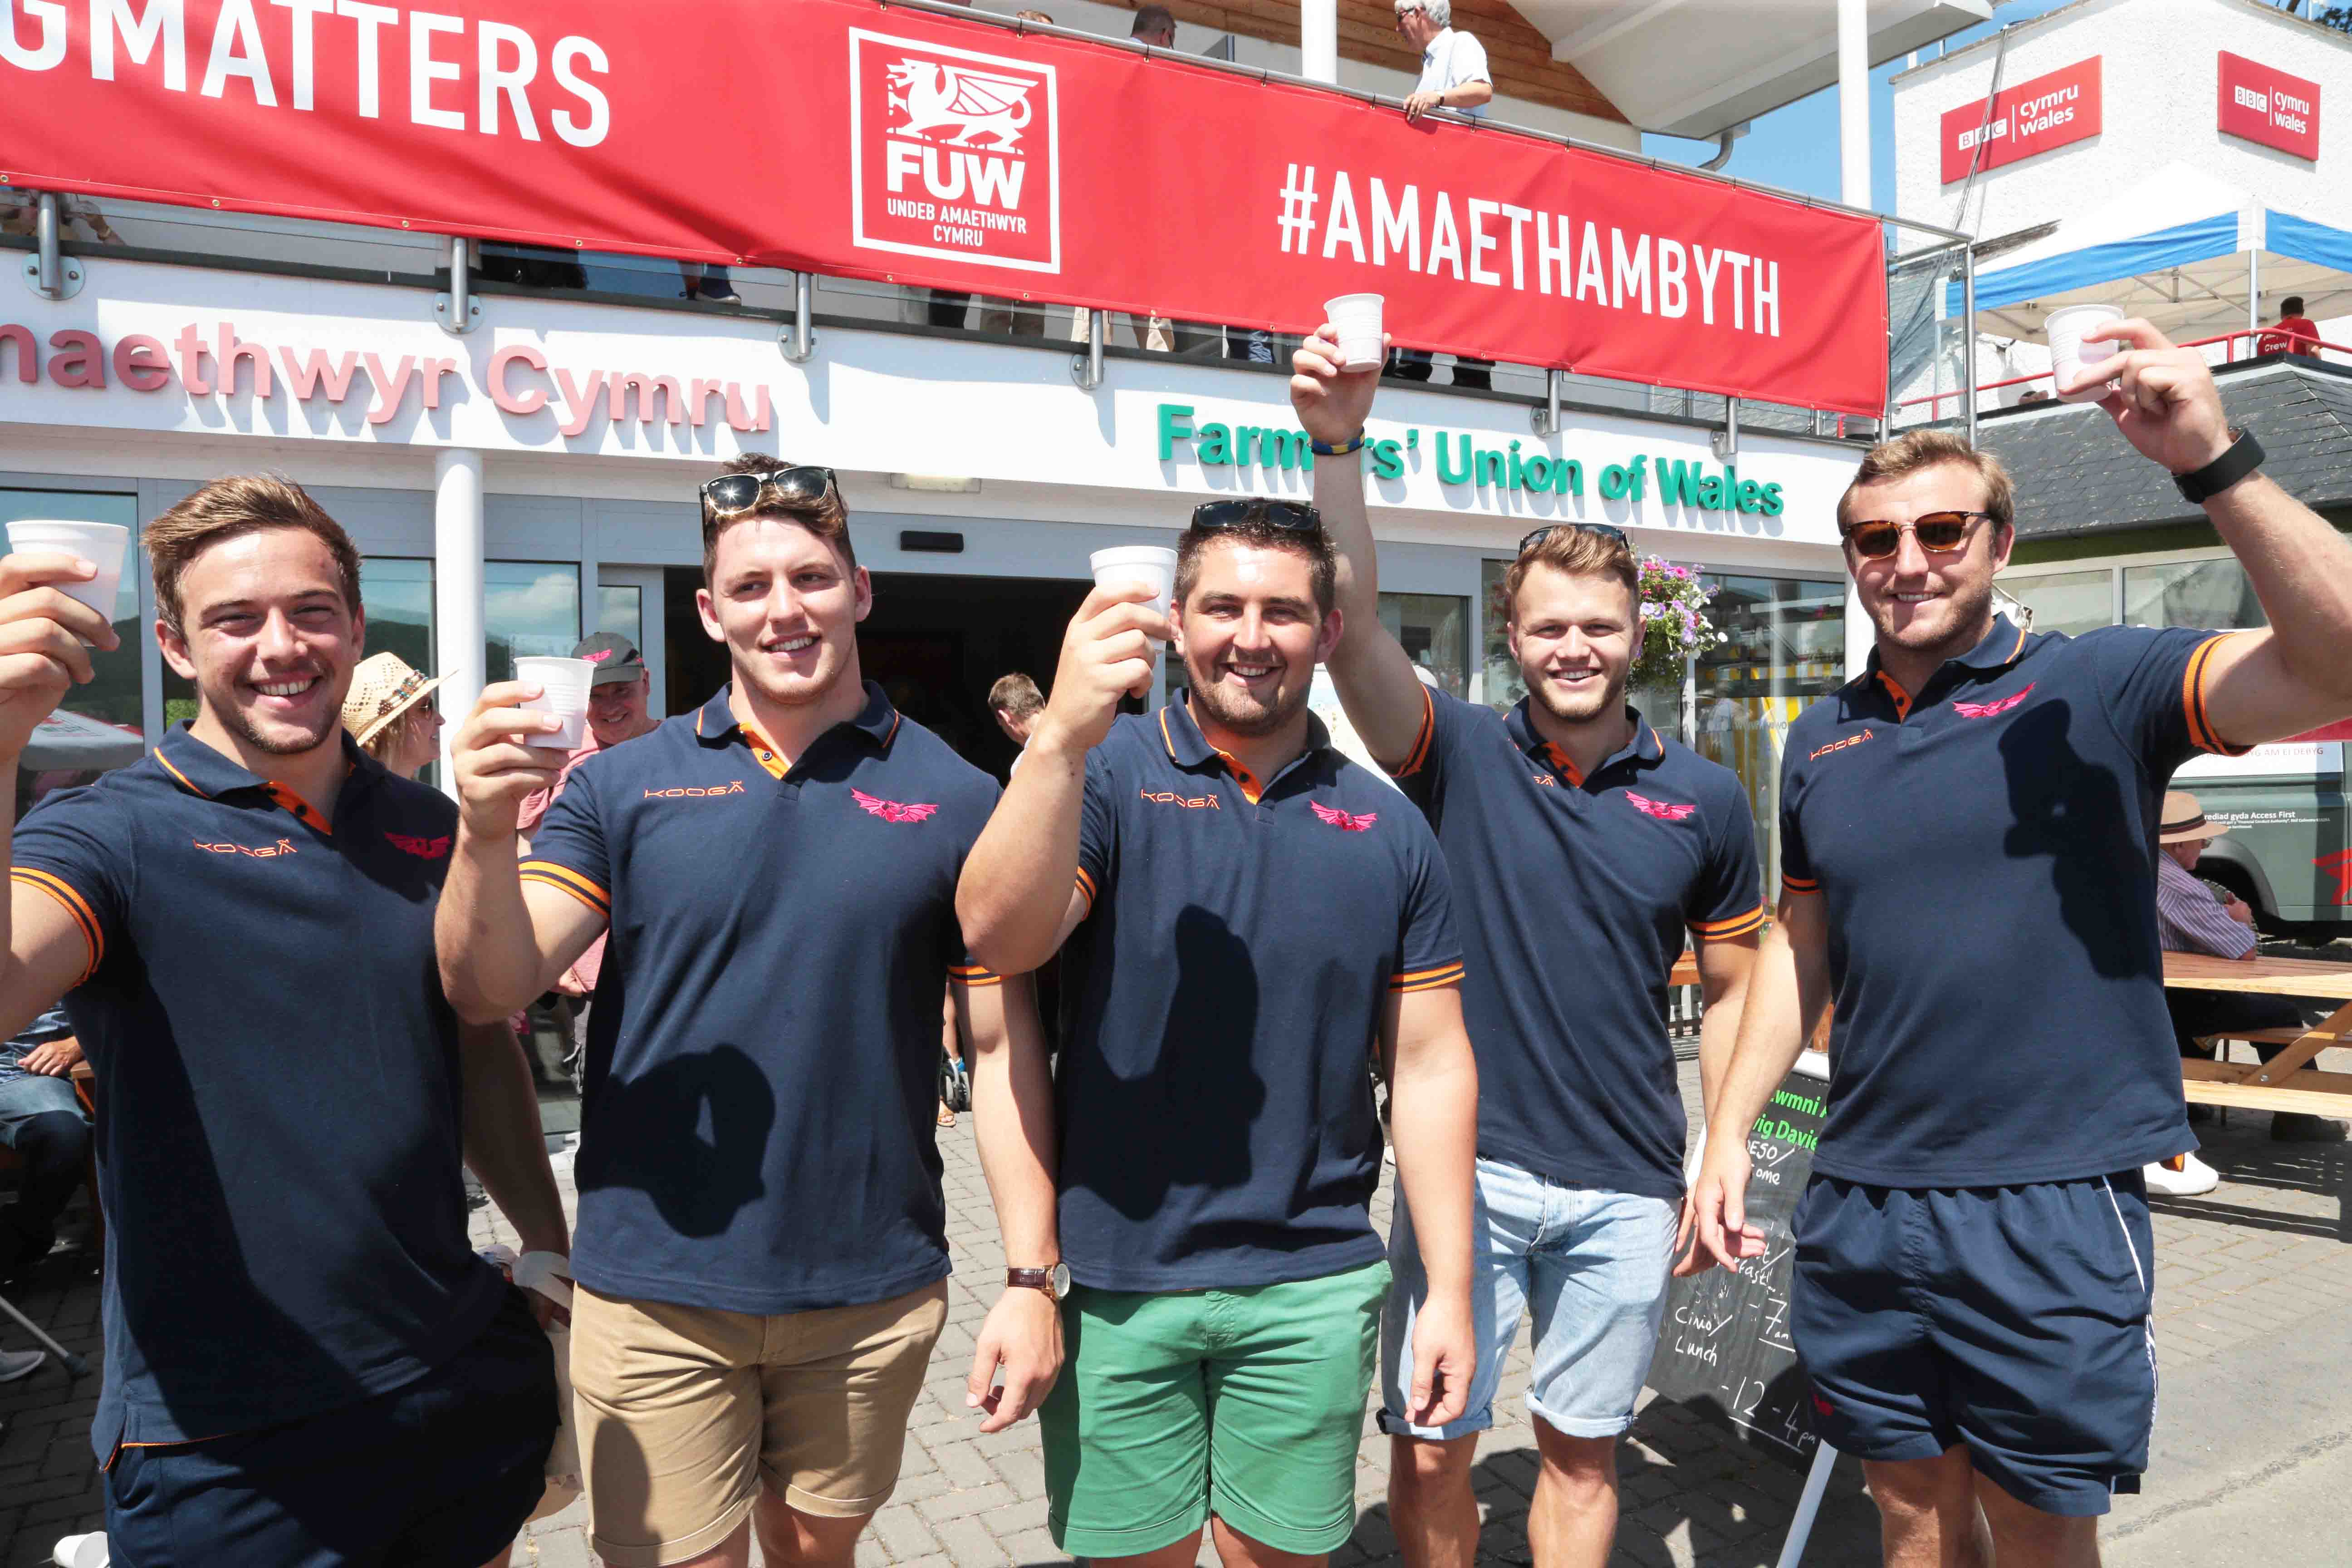 The Scarlets rugby team helped Farmers Union of Wales by handing out milk to children